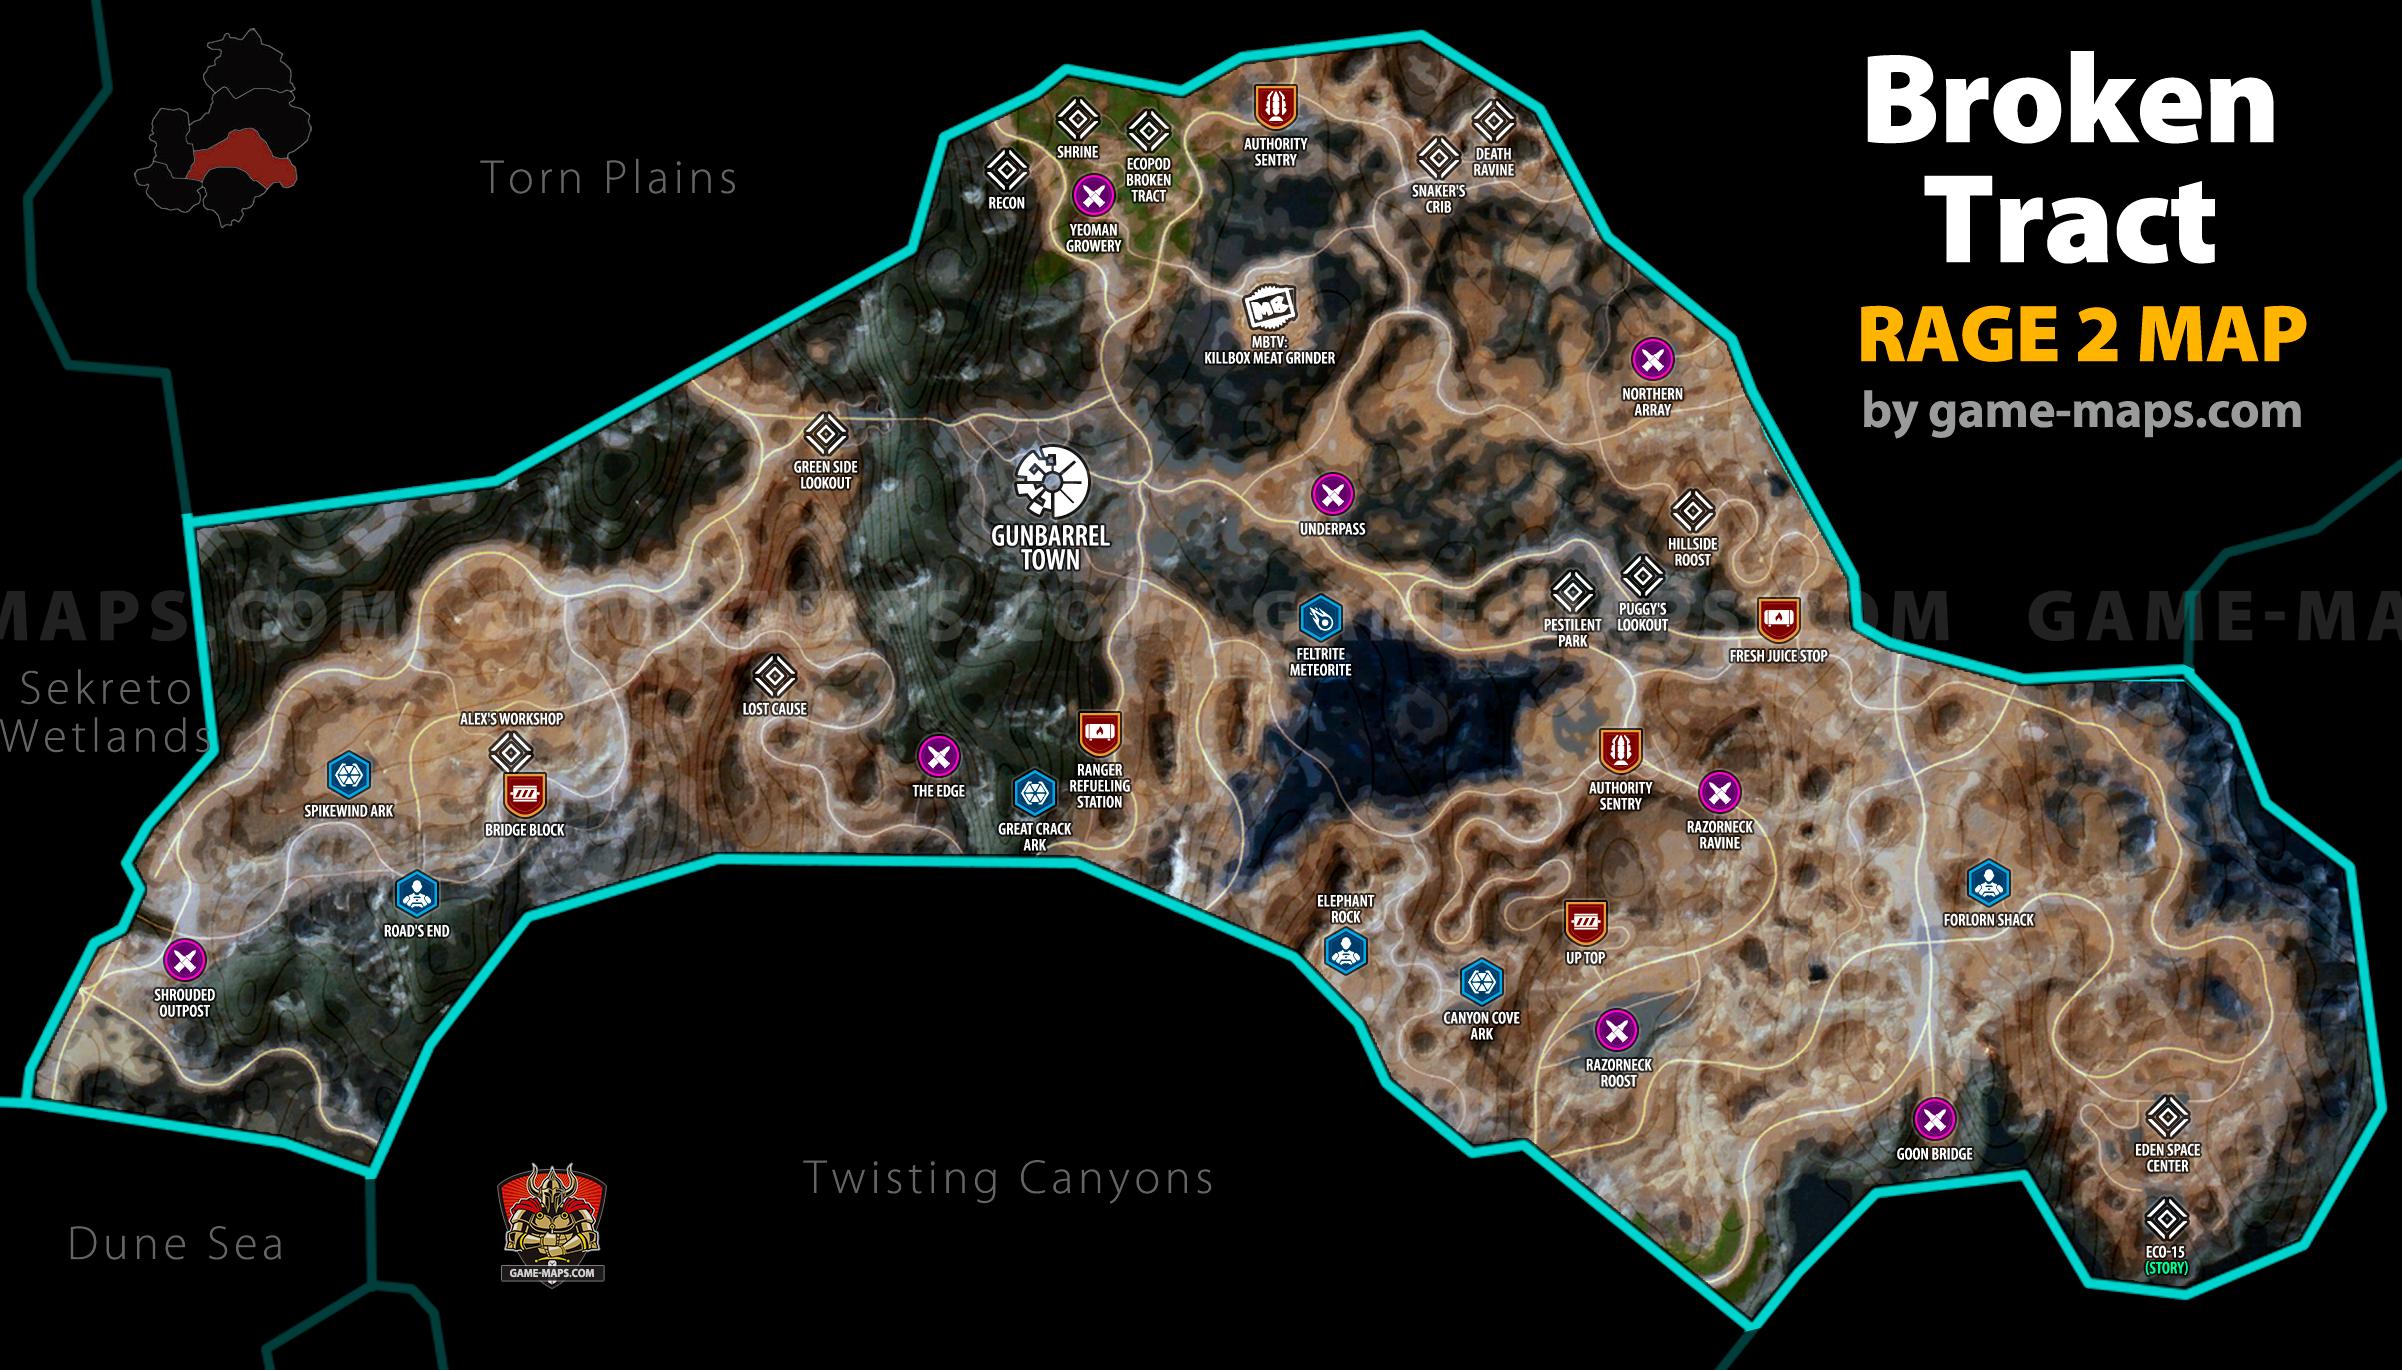 Broken Tract - Rage 2 Map with Locations